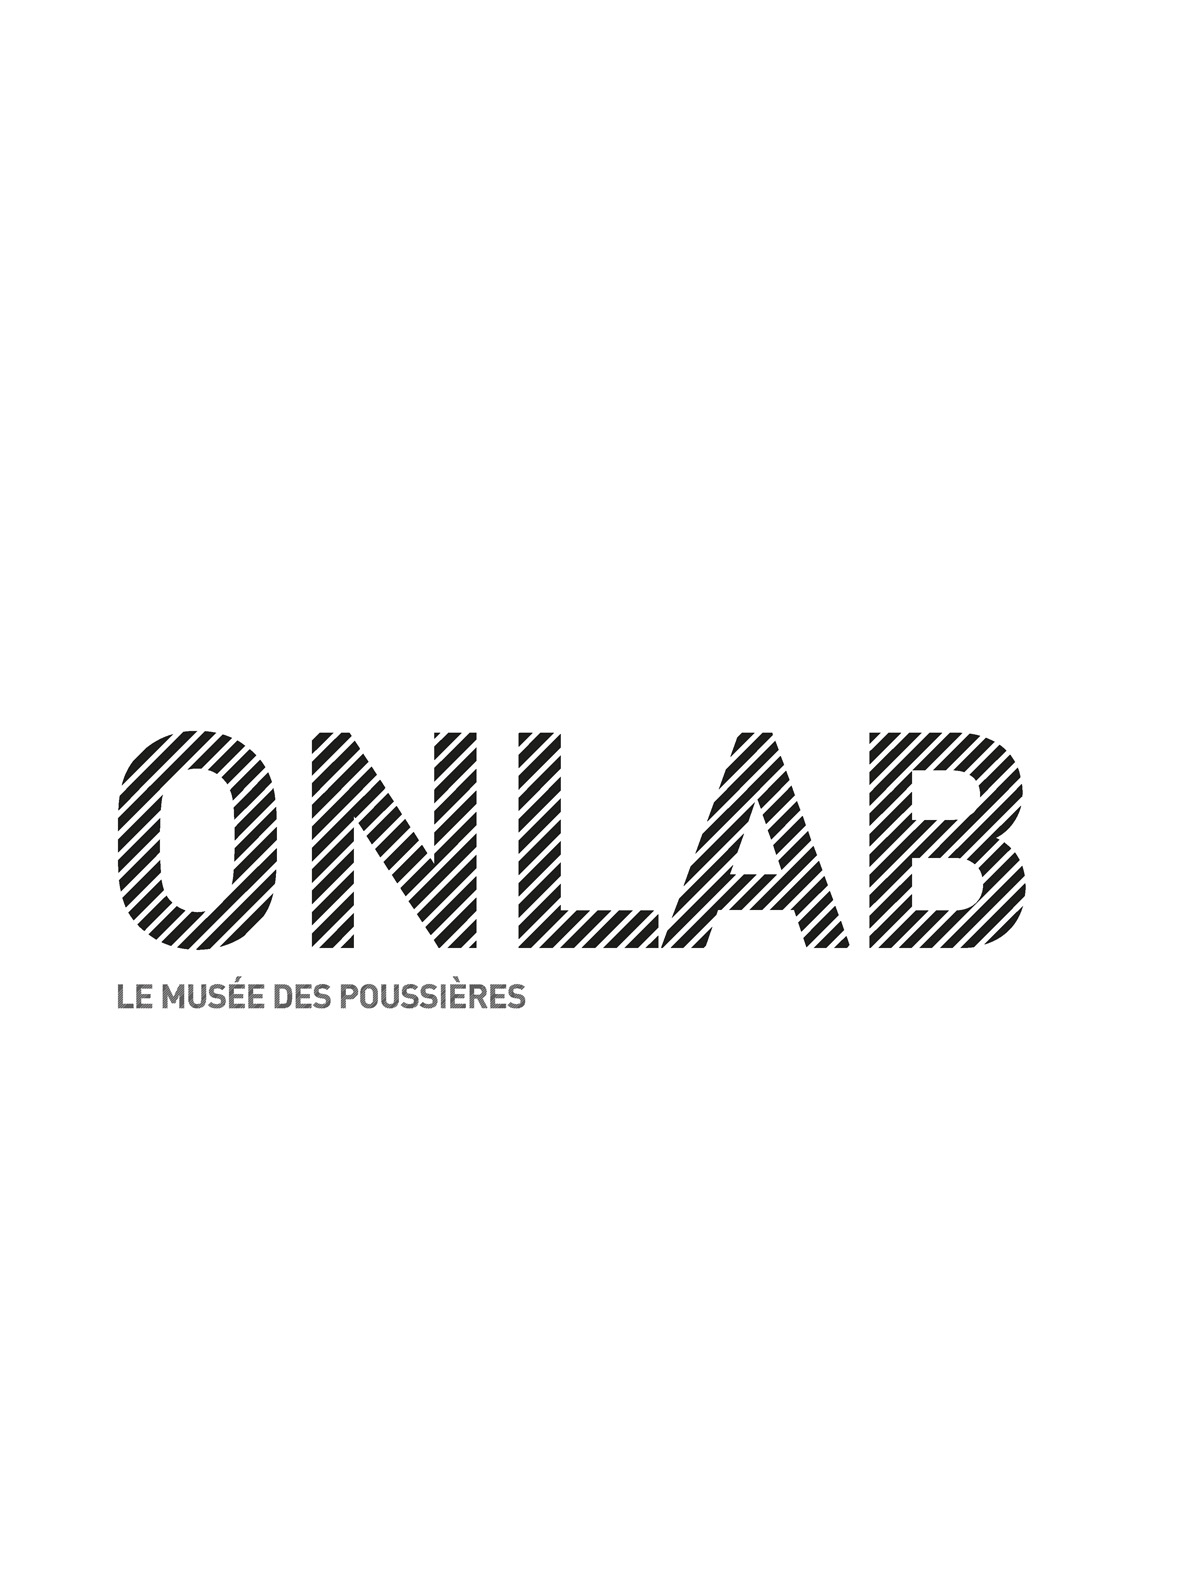 Michel Paysant, recent project, Onlab, page 